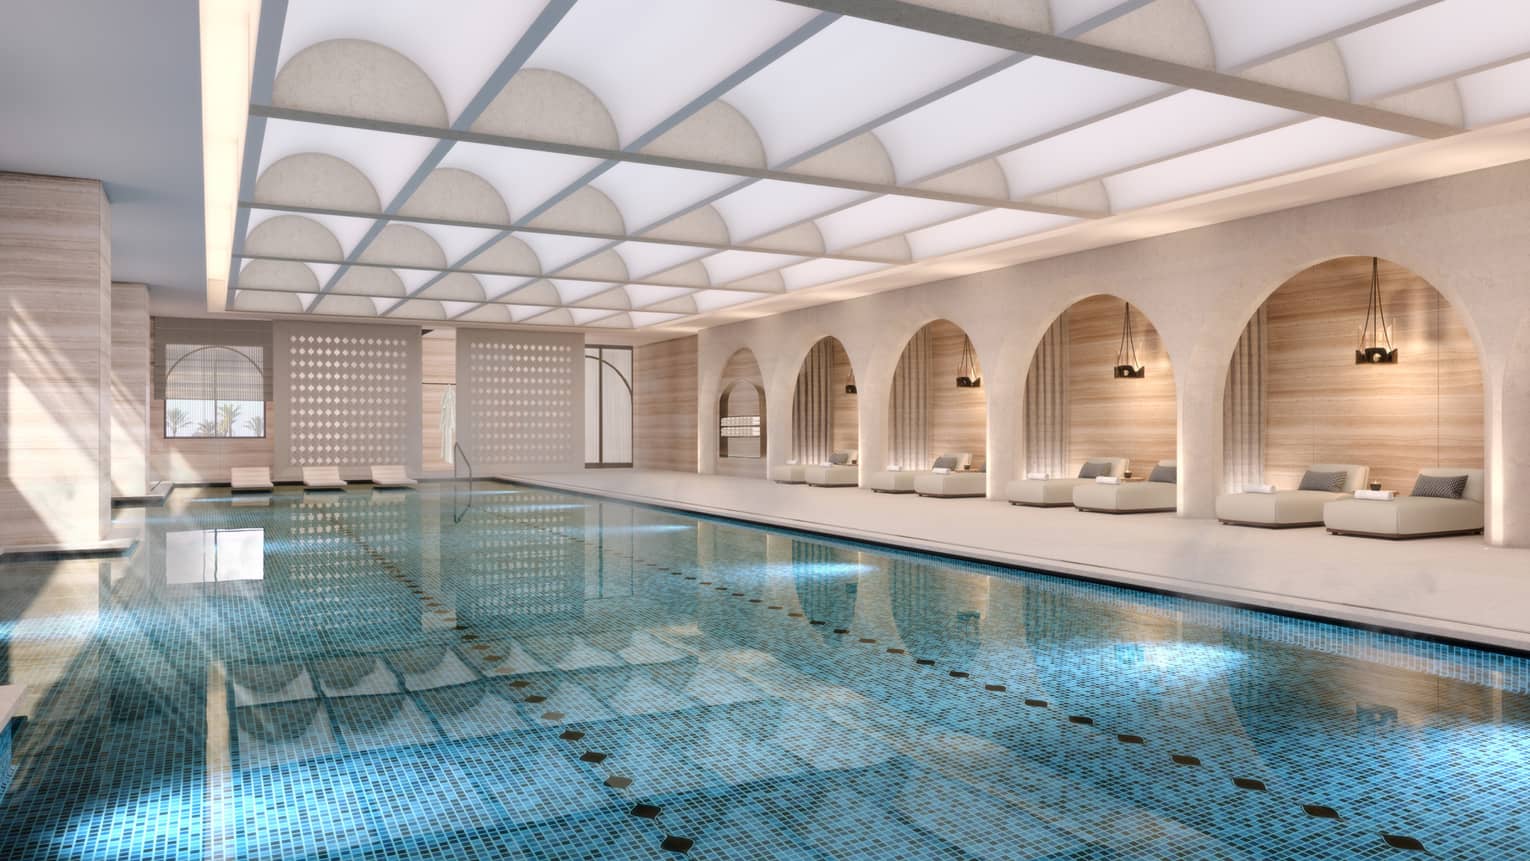 Indoor pool with daybeds along the wall